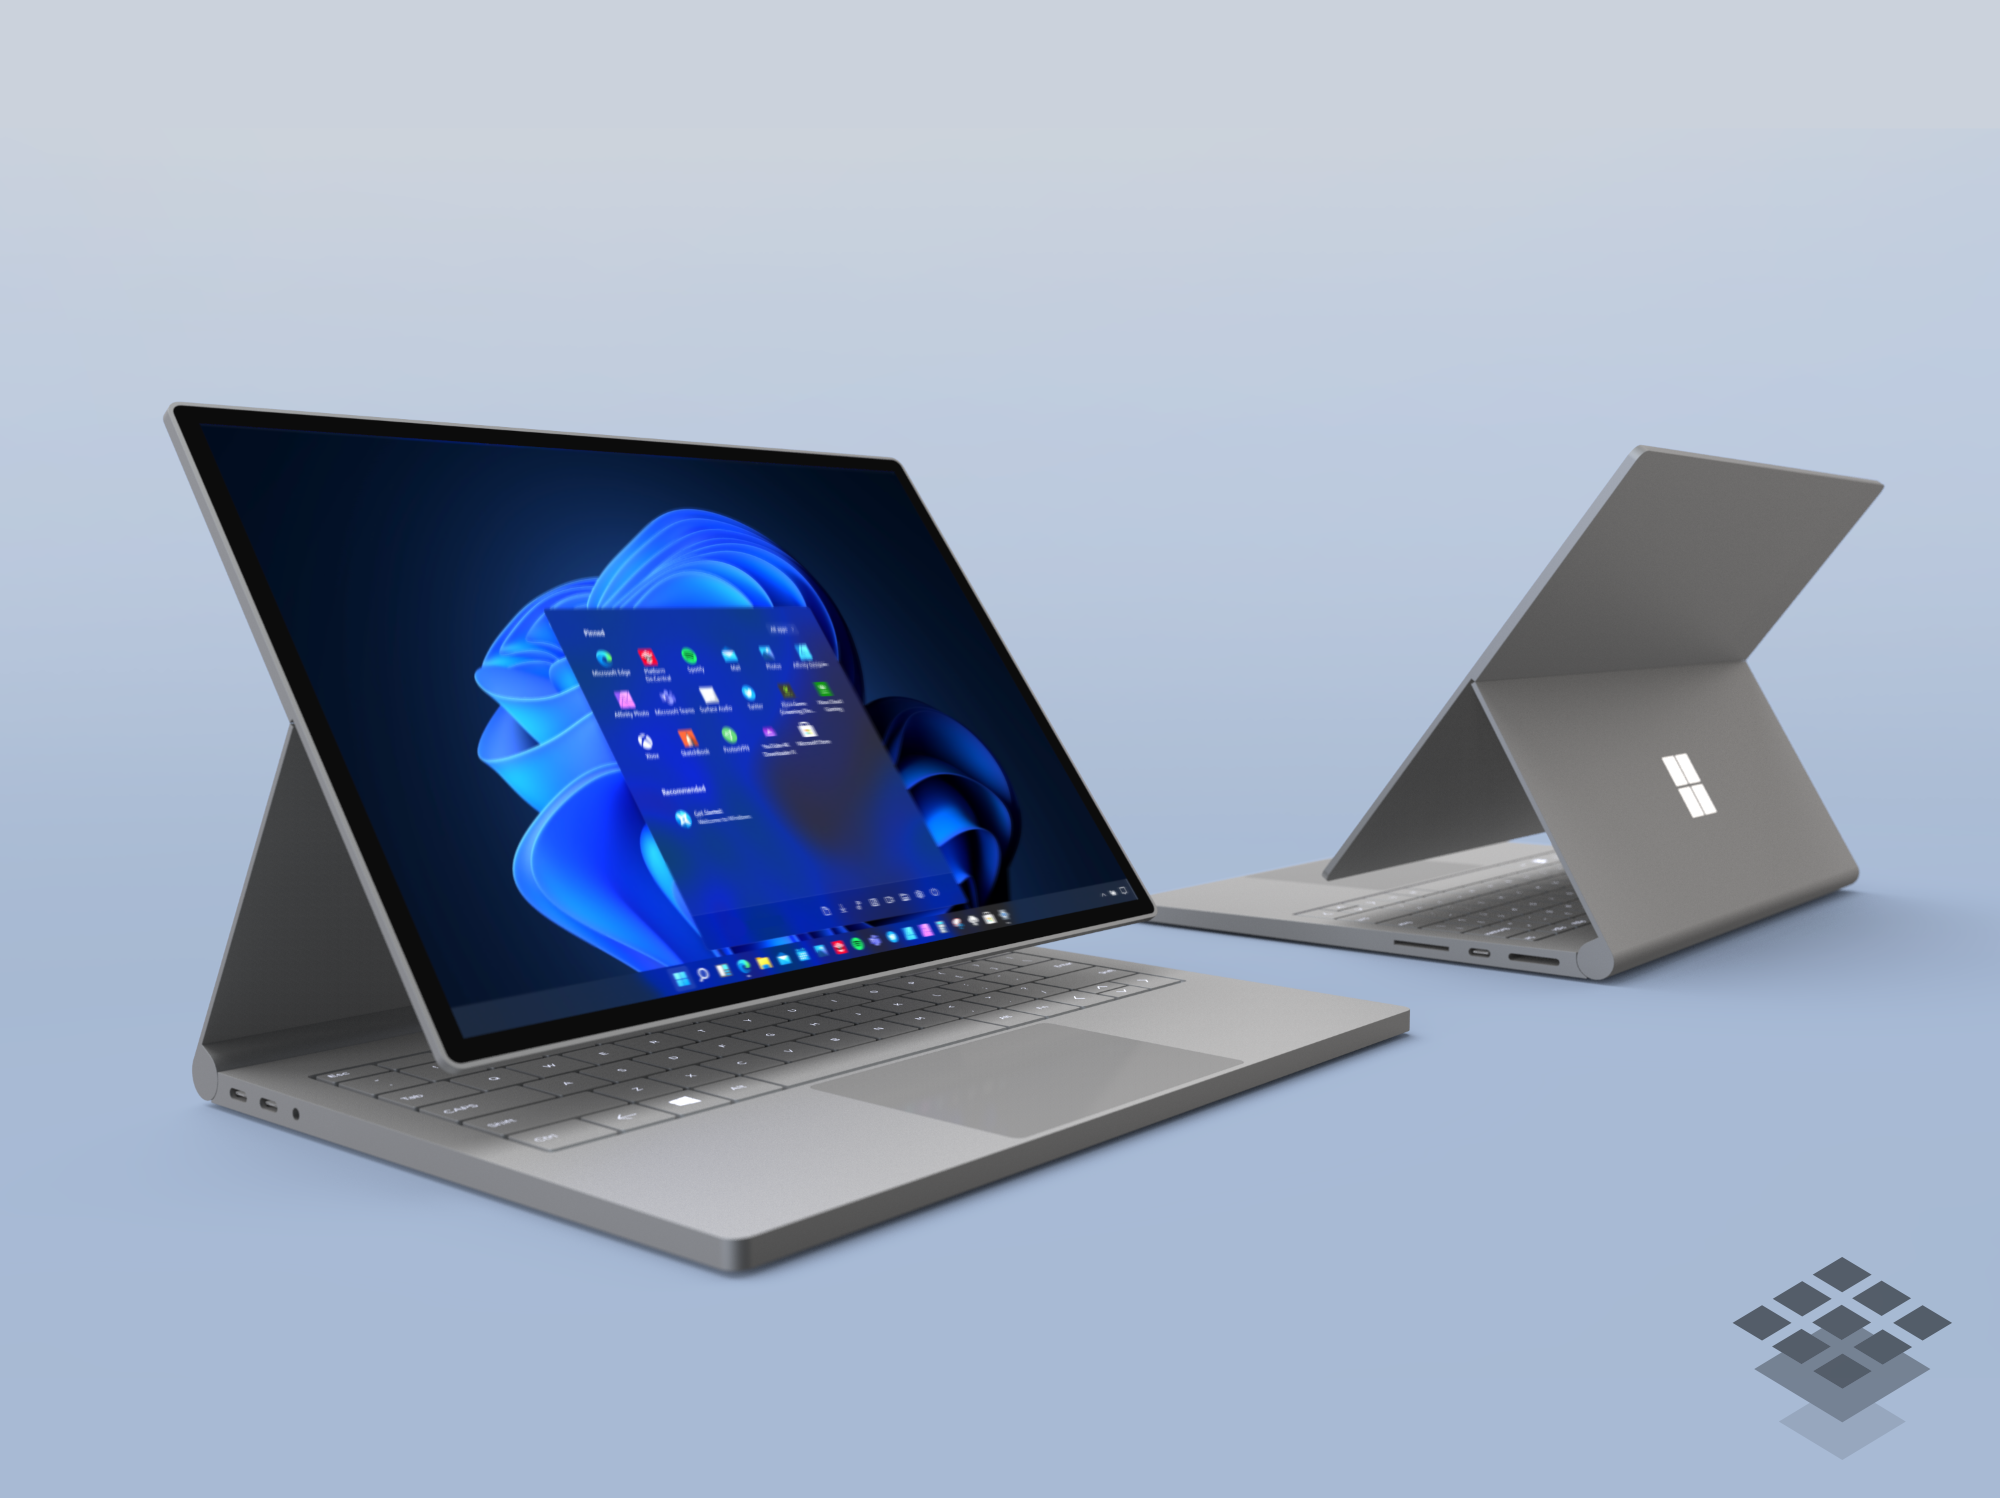 The Surface hardware Windows 11 will launch with this fall and the true Pro-level Laptop we want